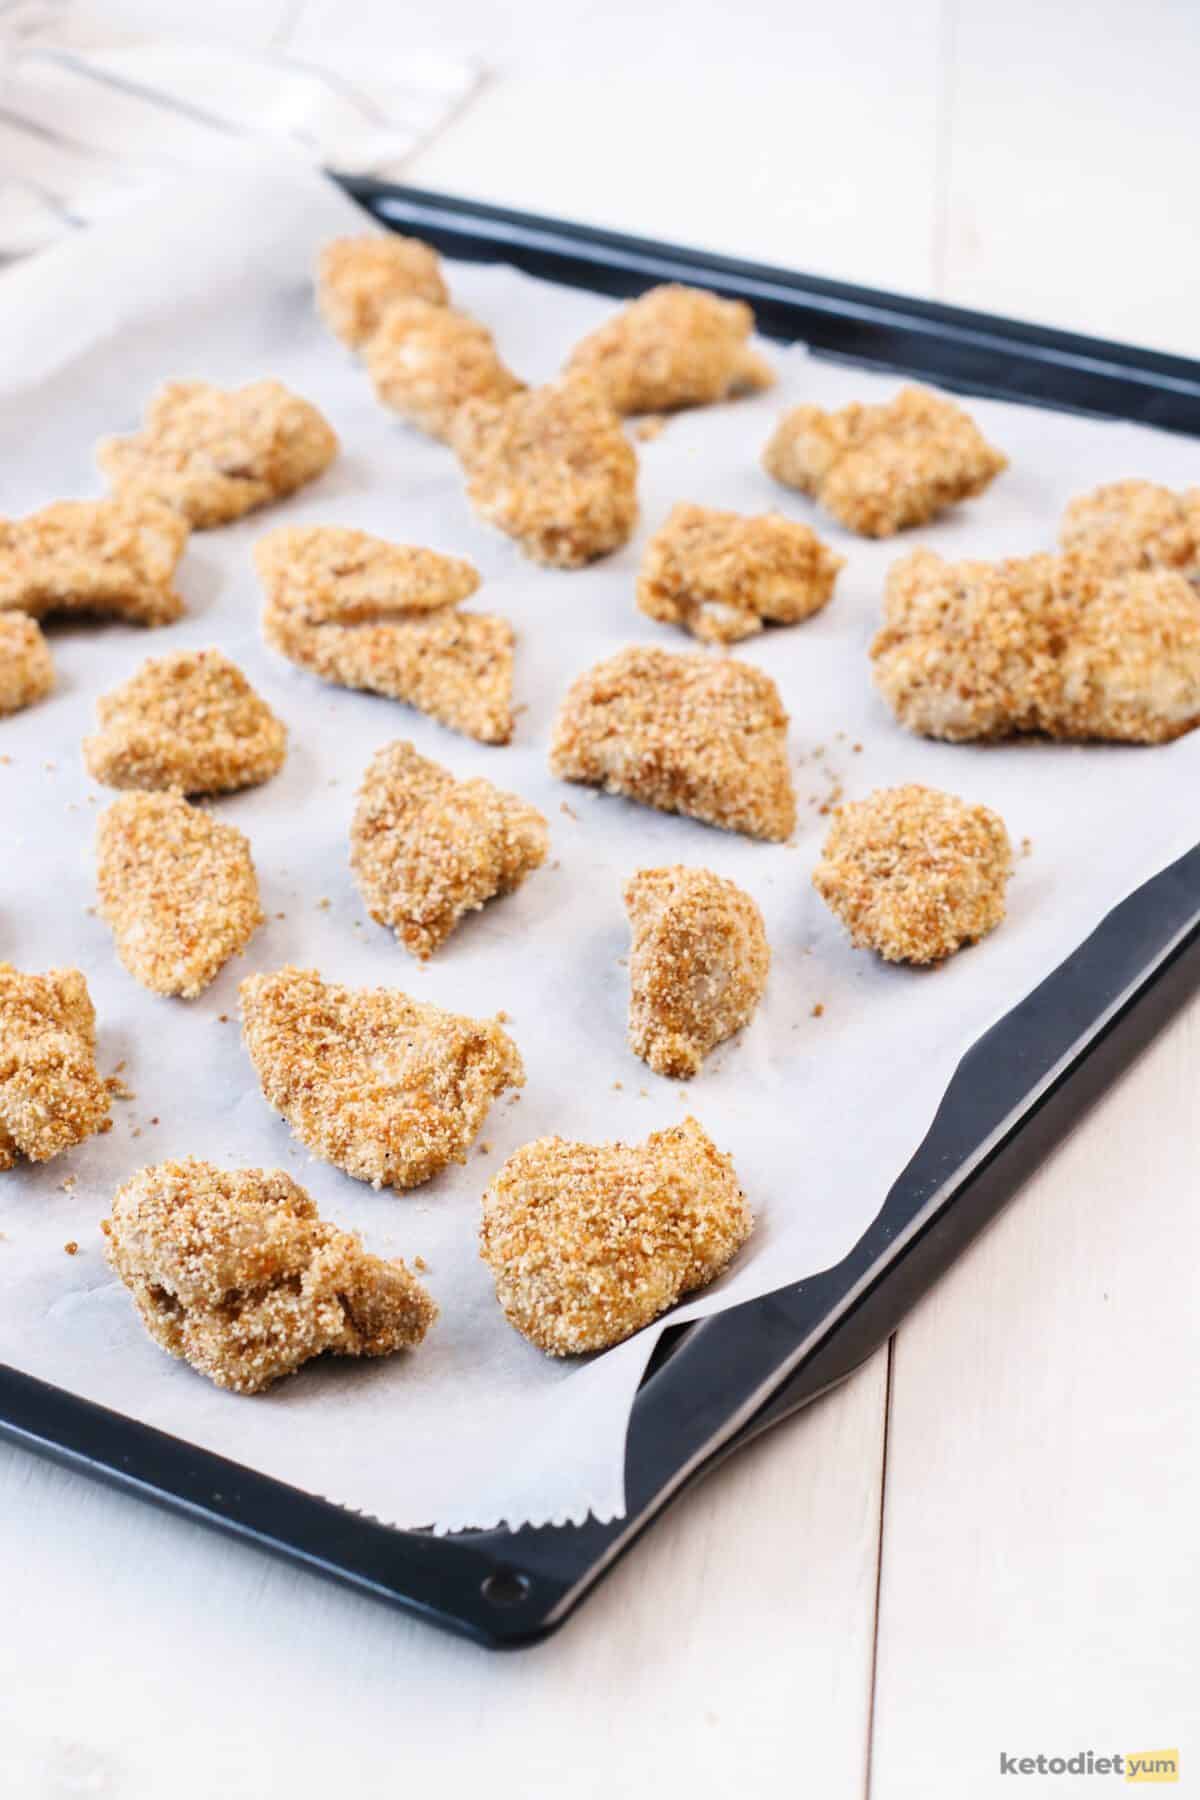 Keto chicken nuggets coated in a pork rind mixture and placed on a lined baking tray